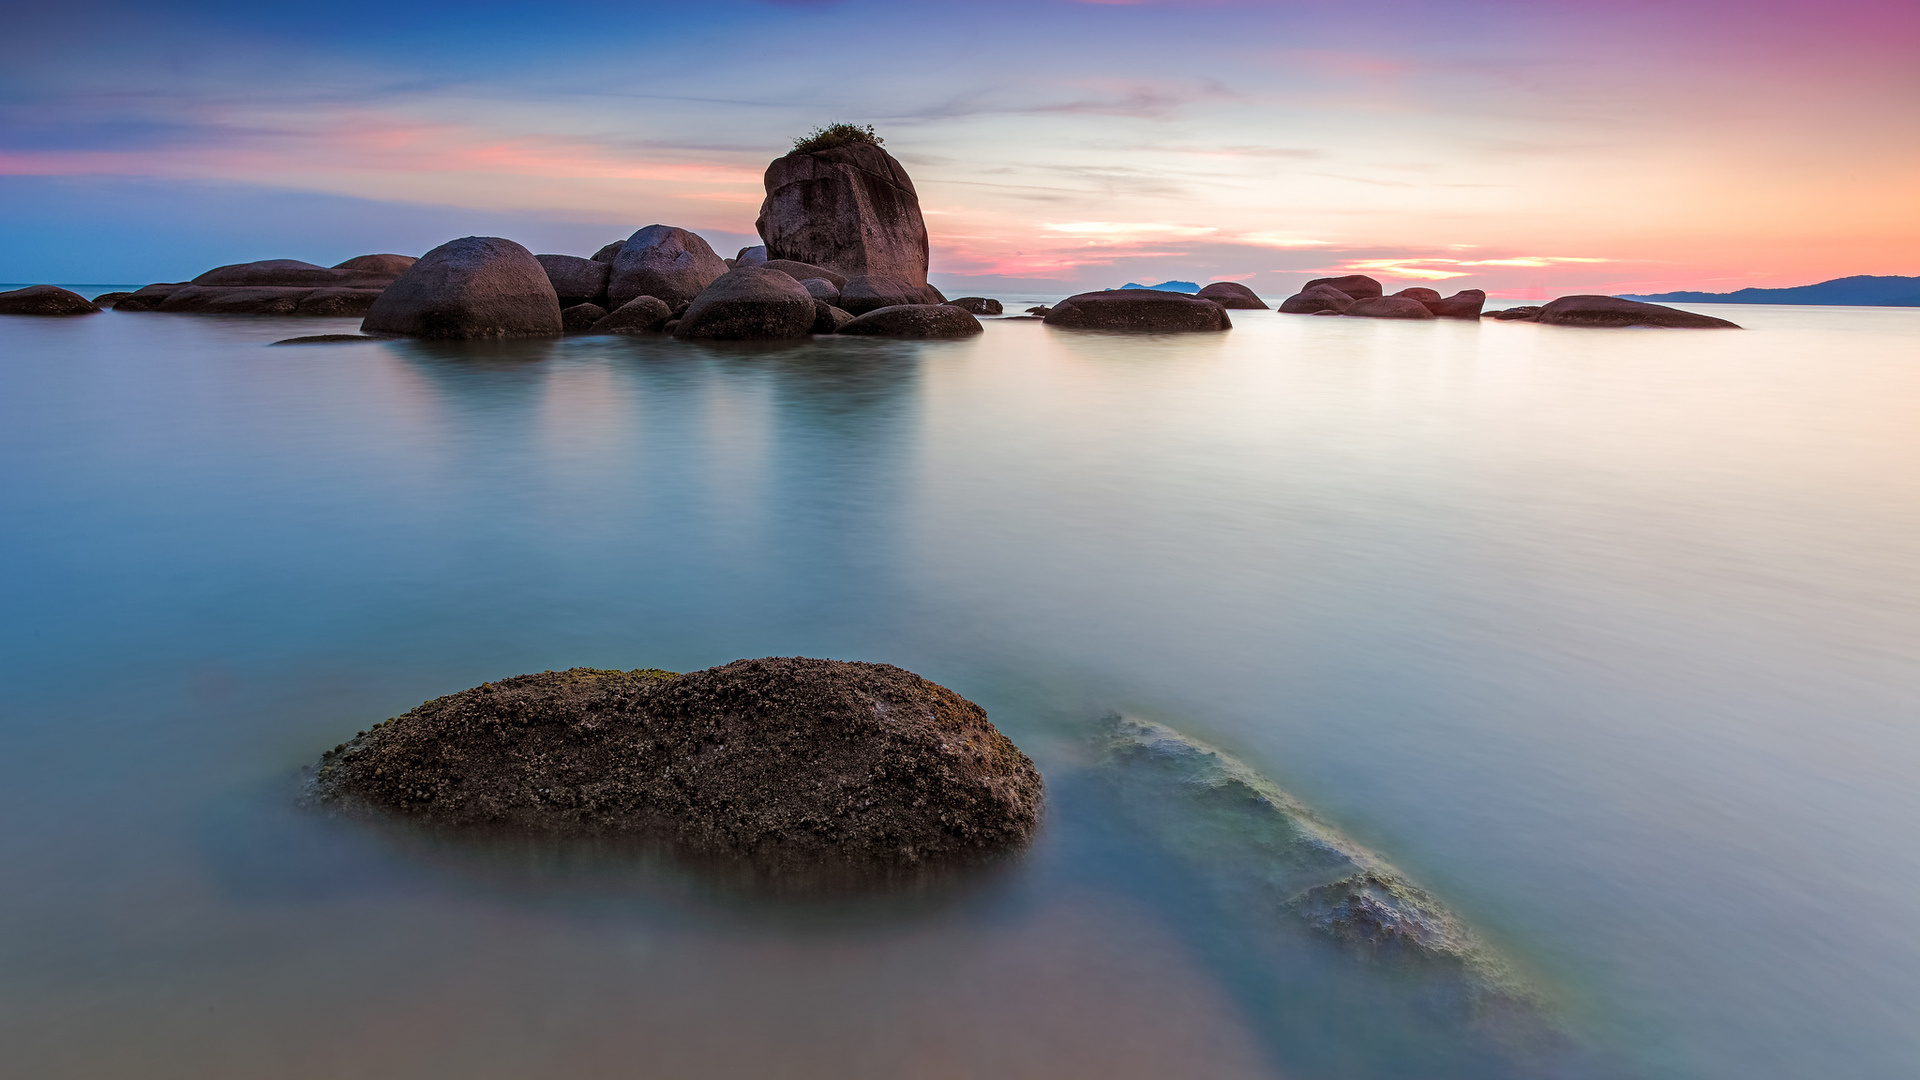 Seascape: Mysterious foggy still water surface at the rocky coast of the sea, Sunset time. 1920x1080 Full HD Wallpaper.